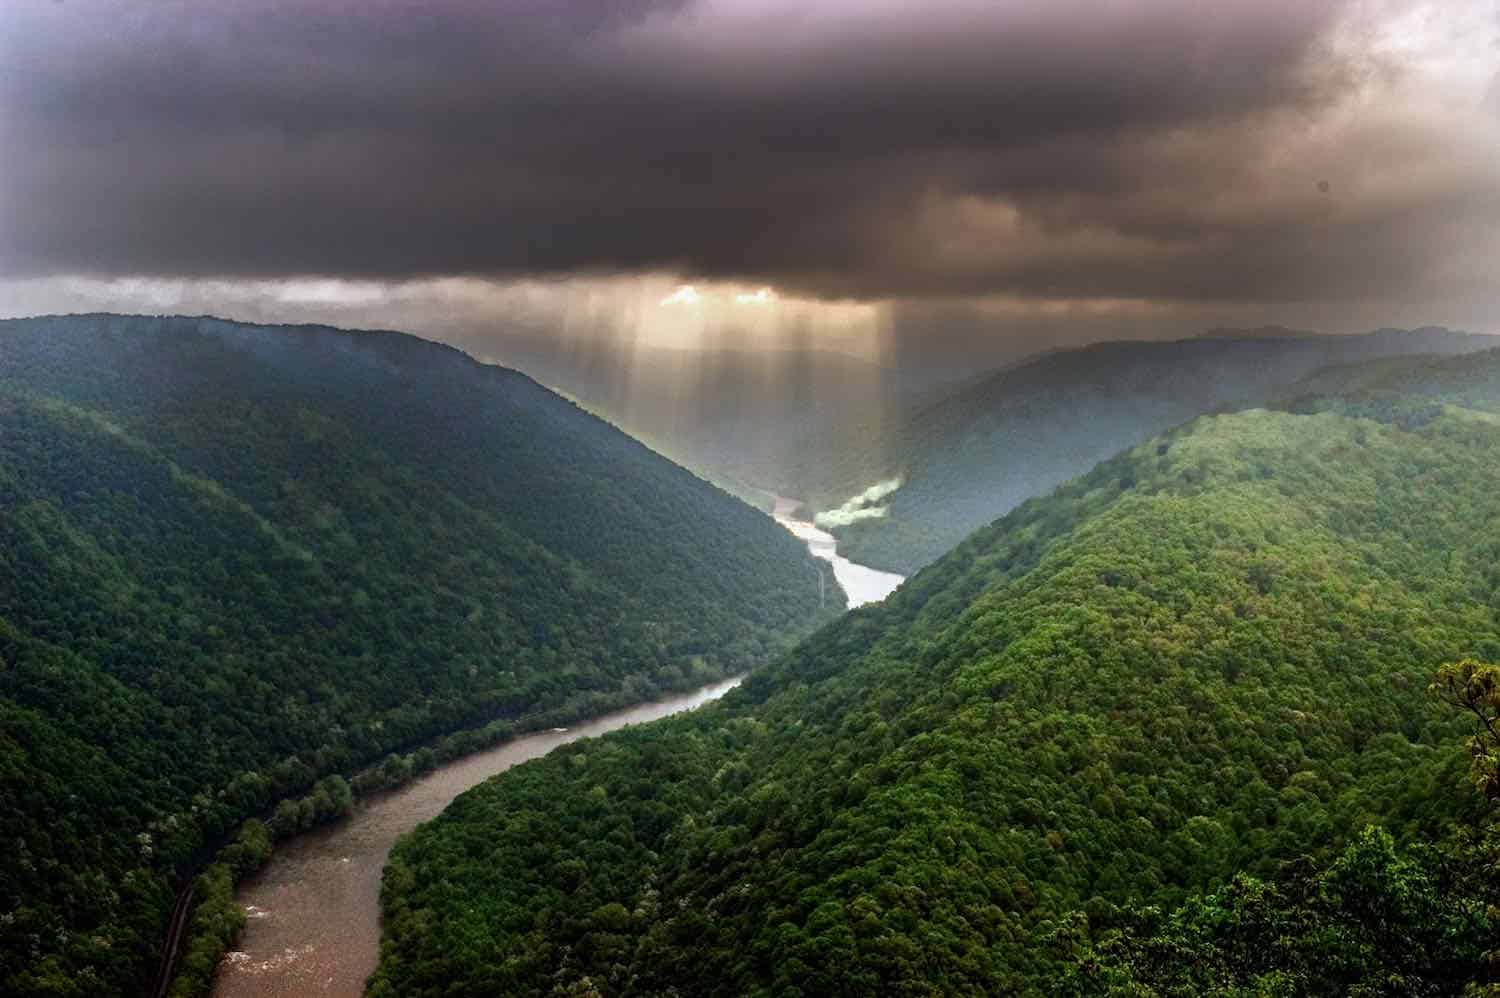 Light shafts stream through a storm cloud illuminating a river that flows between green mountains at New River Gorge National Park.